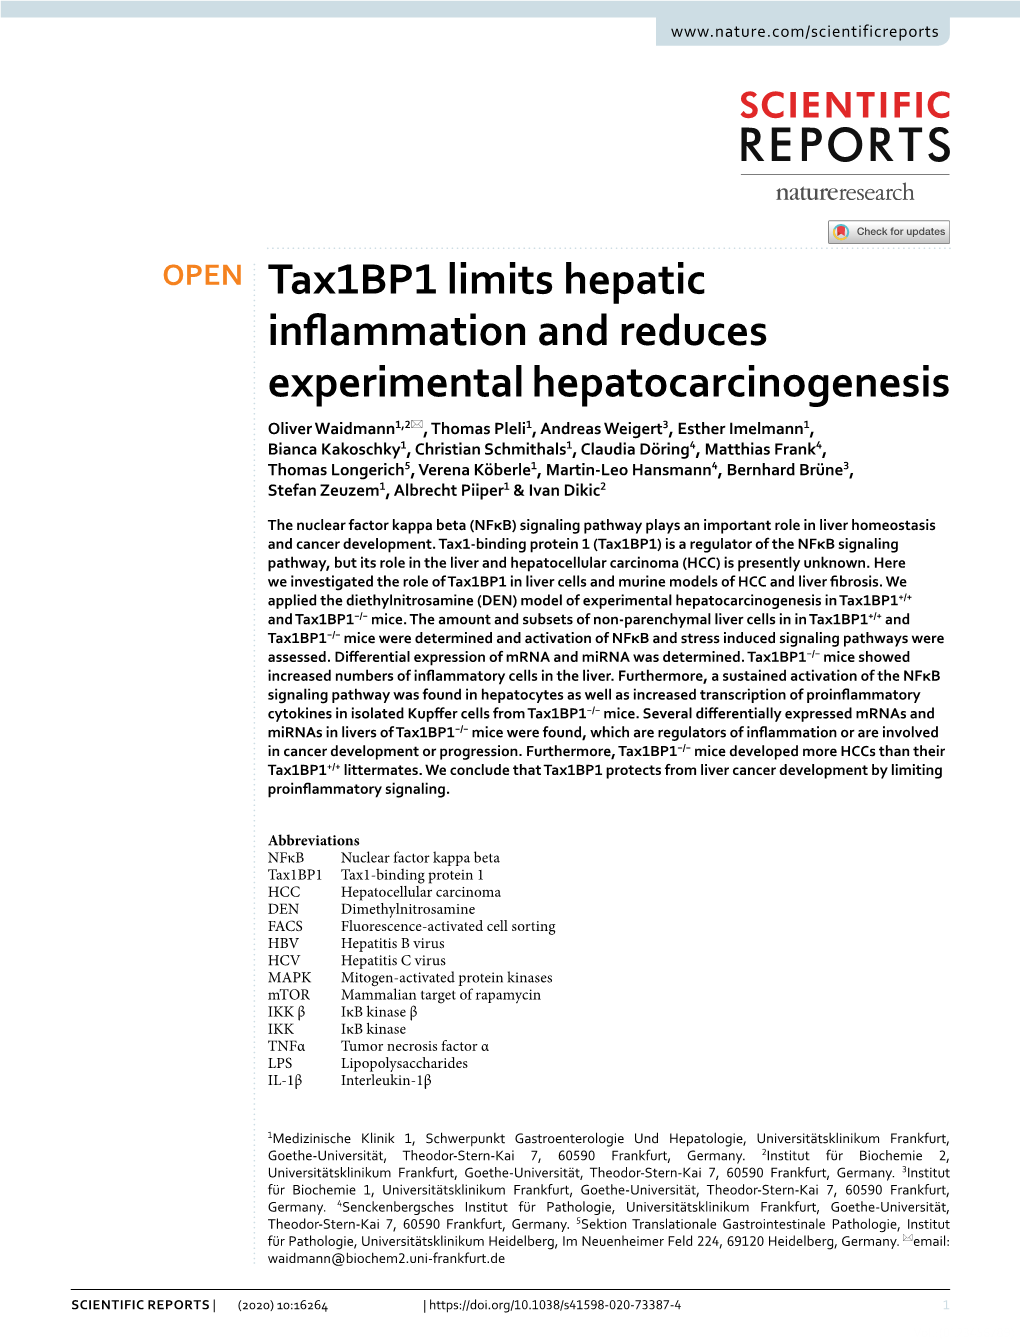 Tax1bp1 Limits Hepatic Inflammation and Reduces Experimental